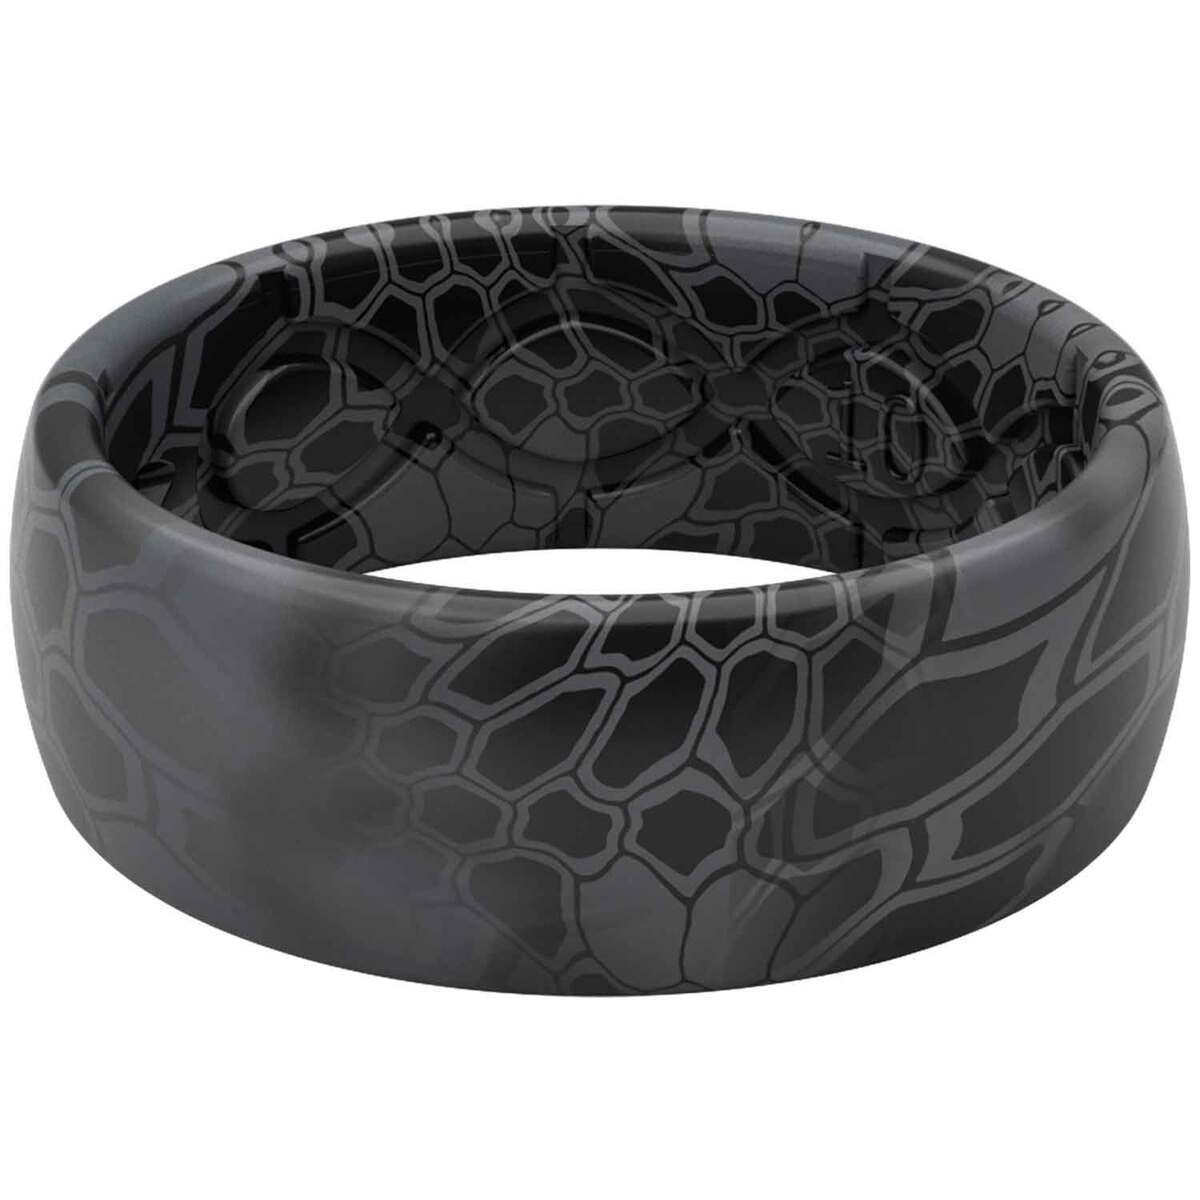 Groove Life Kryptek Typhon Men's Silicone Camo Ring - Size 13 ...